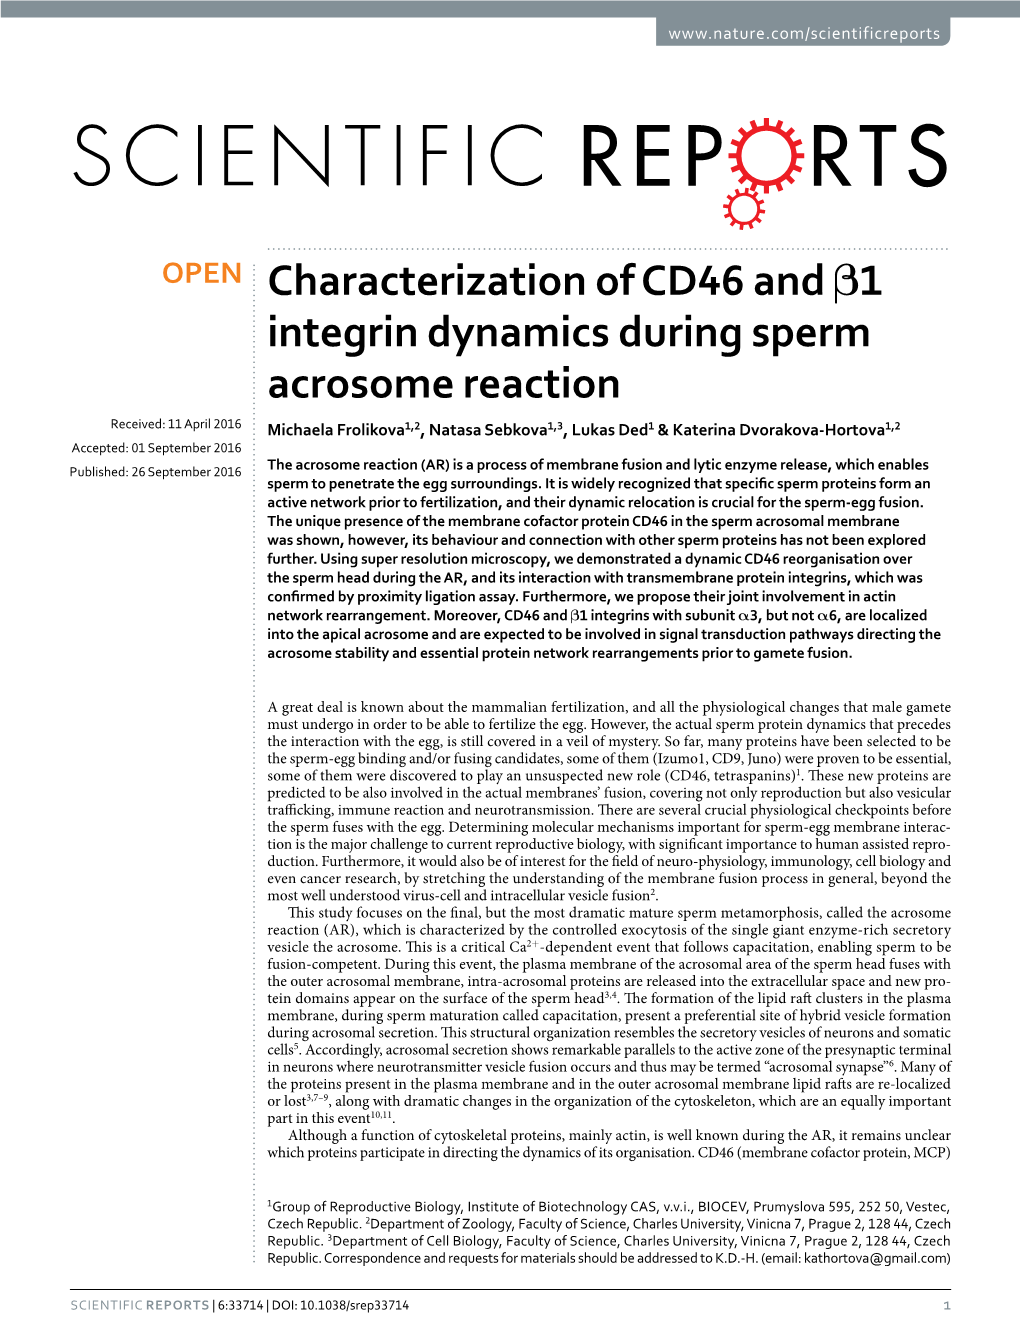 Characterization of CD46 and Β1 Integrin Dynamics During Sperm